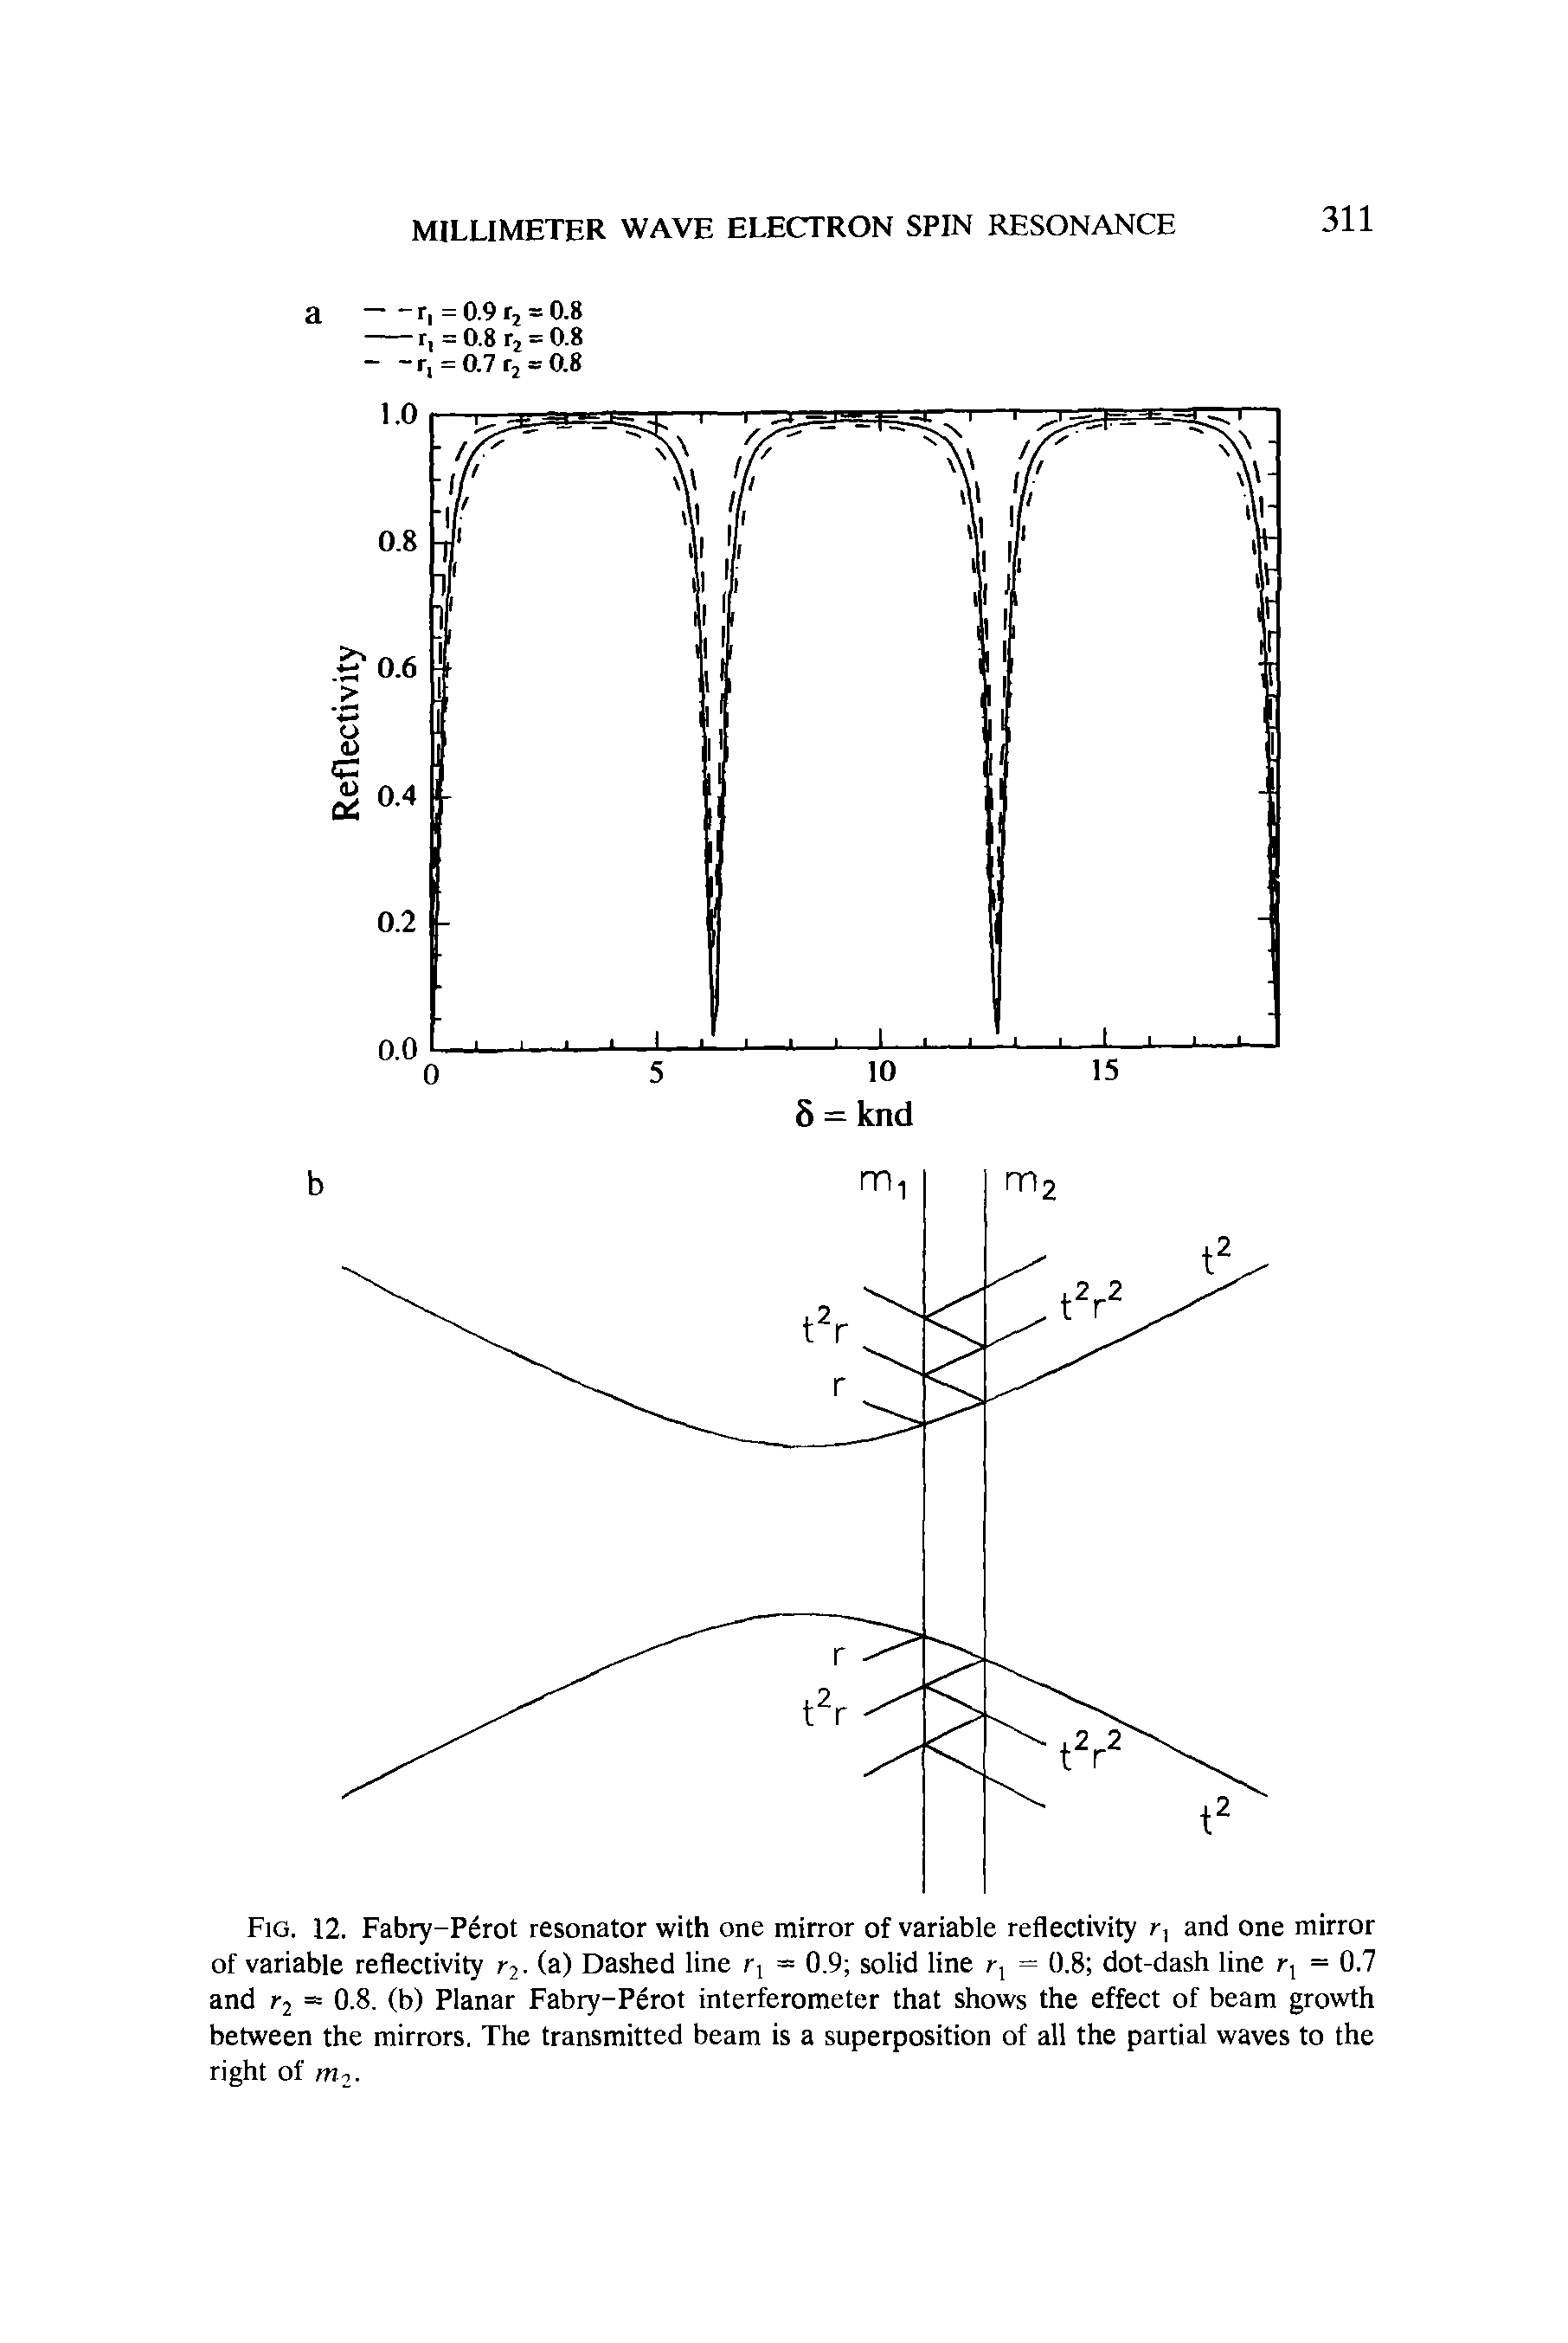 Fig. 12. Fabry-Perot resonator with one mirror of variable reflectivity r, and one mirror of variable reflectivity r2 - (a) Dashed line = 0.9 solid line r-j = 0.8 dot-dash line r, = 0.7 and r-2 = 0.8. (b) Planar Fabry-Perot interferometer that shows the effect of beam growth between the mirrors. The transmitted beam is a superposition of all the partial waves to the right of m,.